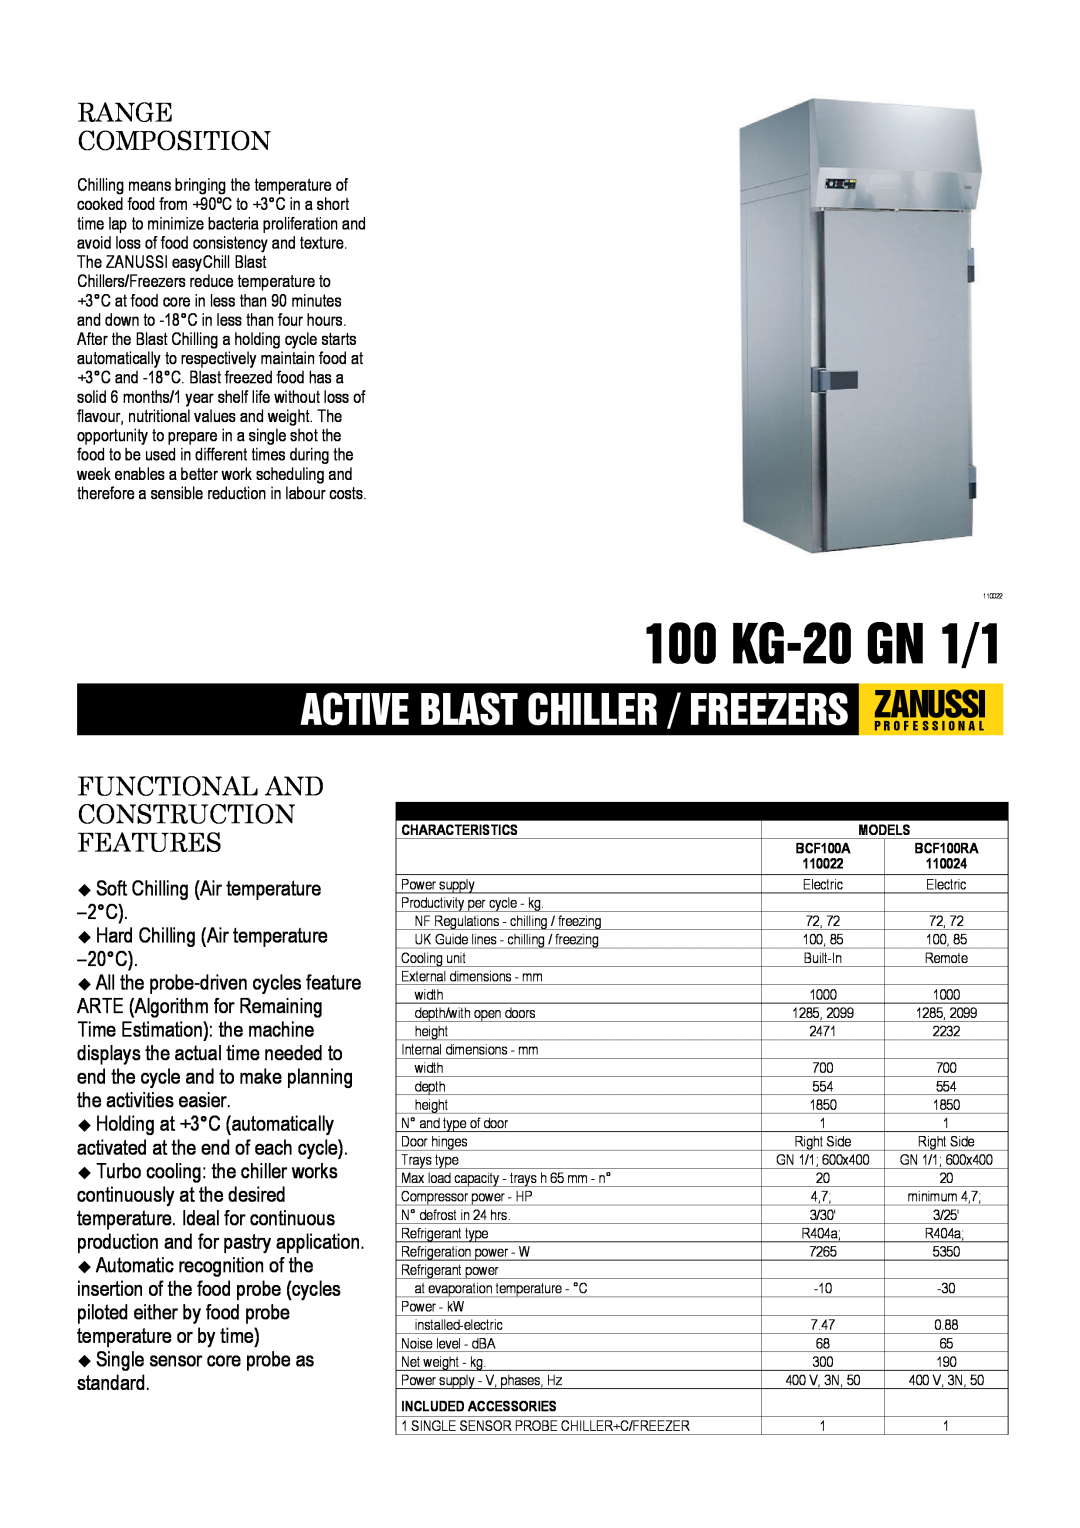 Zanussi BCF100A, BCF100RA, 110022 dimensions 100 KG-20GN 1/1, Range Composition, Functional And Construction Features 